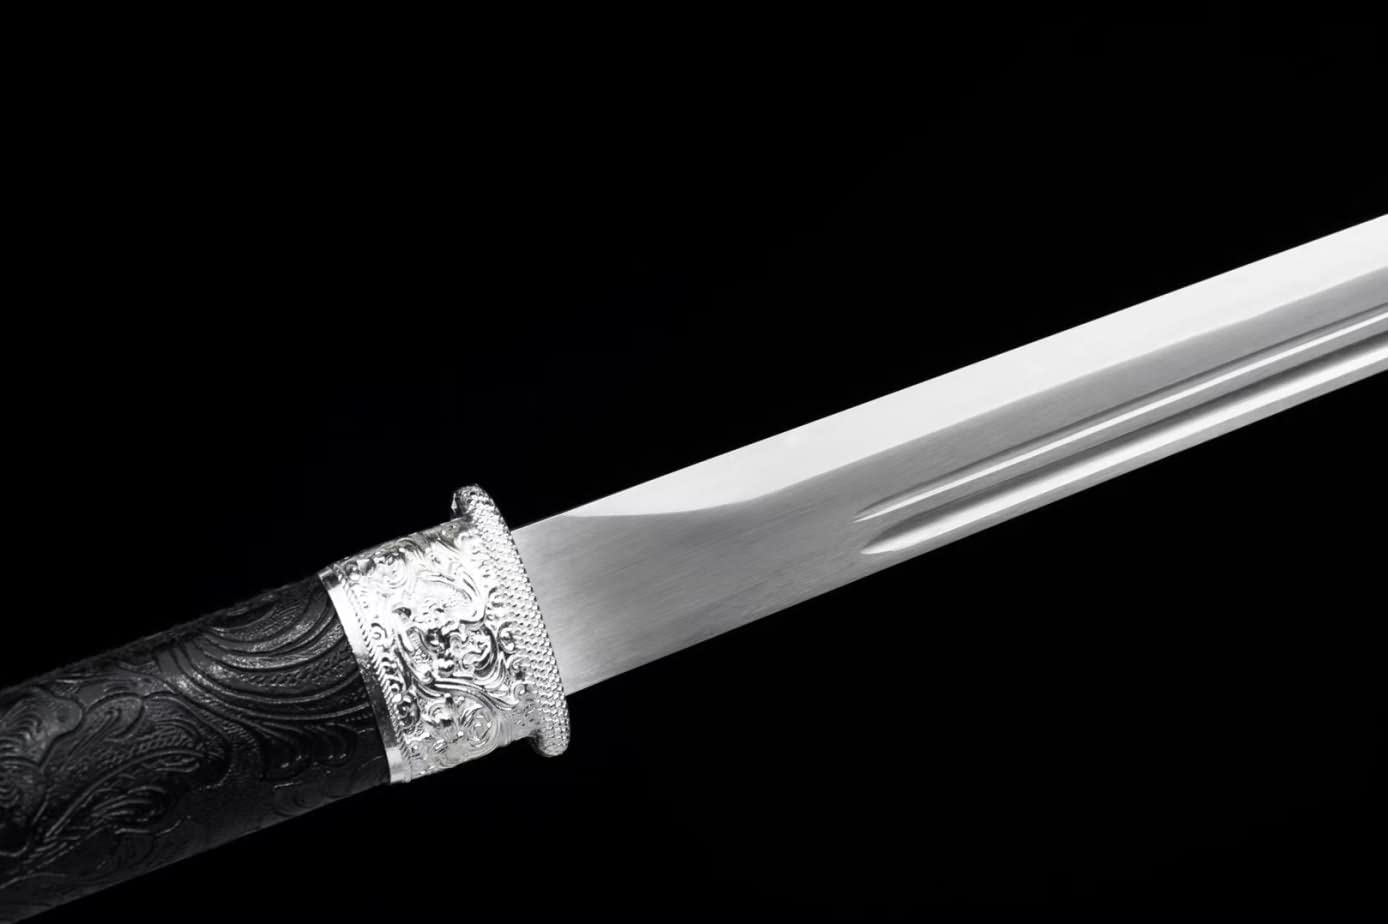 Ring-Headed Han dao high Carbon Steel Blades Martial Arts Weapons,chinese sword